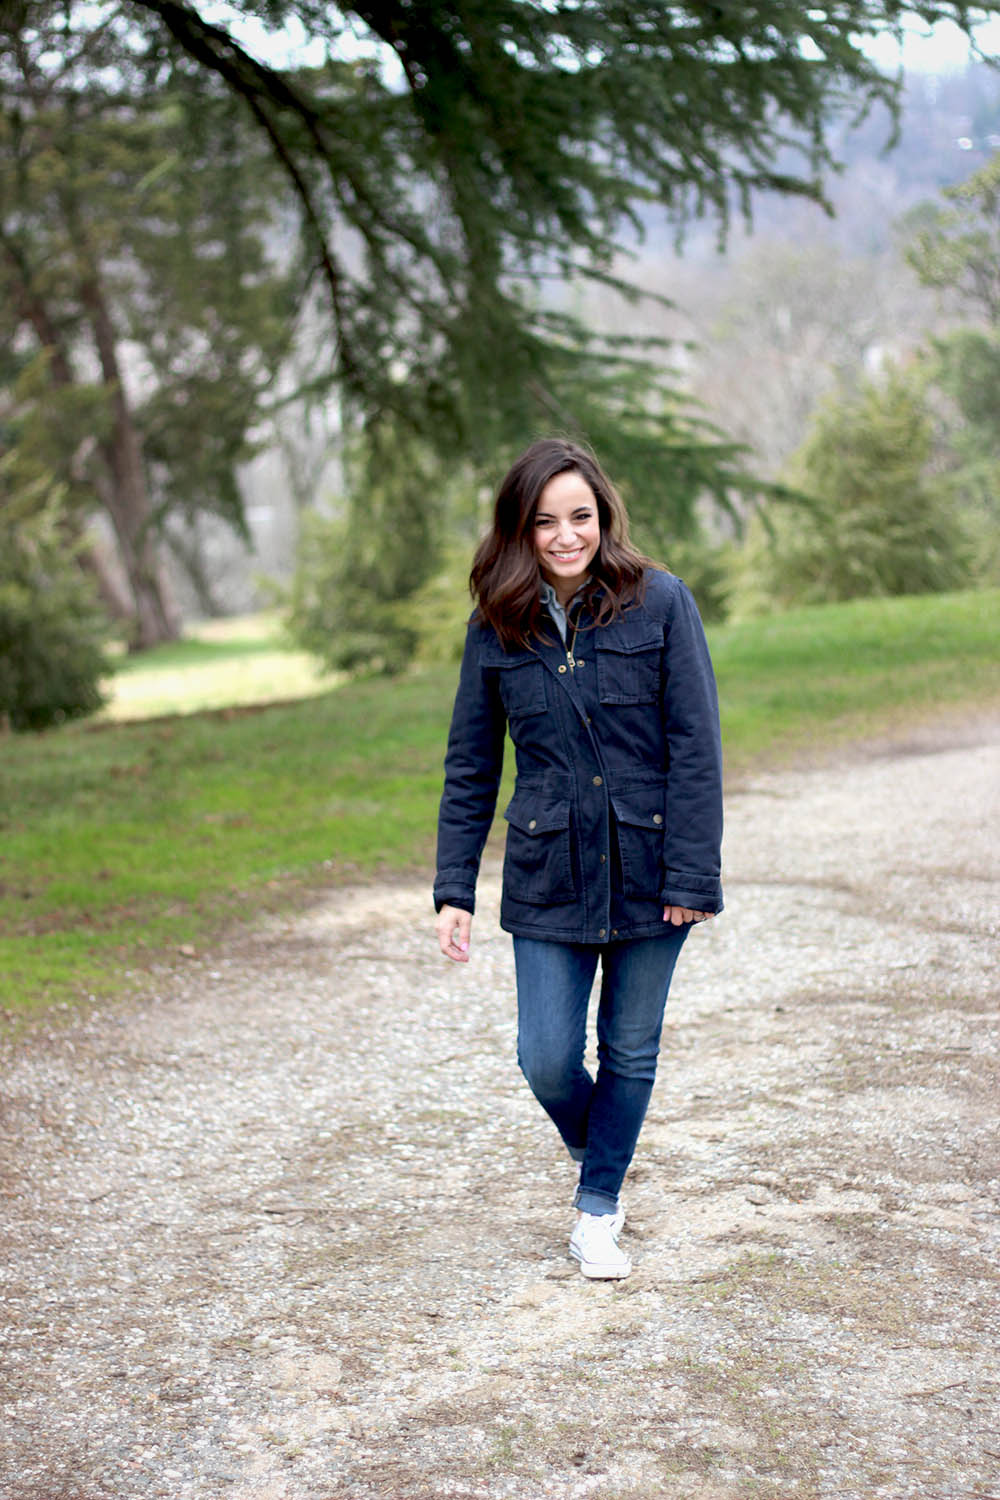 FatFace a UK based clothing line, sent us a few fabulous pieces to compliment a walk through our favorite spot! Brooke is wearing the Eva Four Pocket Jacket (c/o). This jacket is seriously so warm, while still being lightweight, which made it great for a walk through the park.